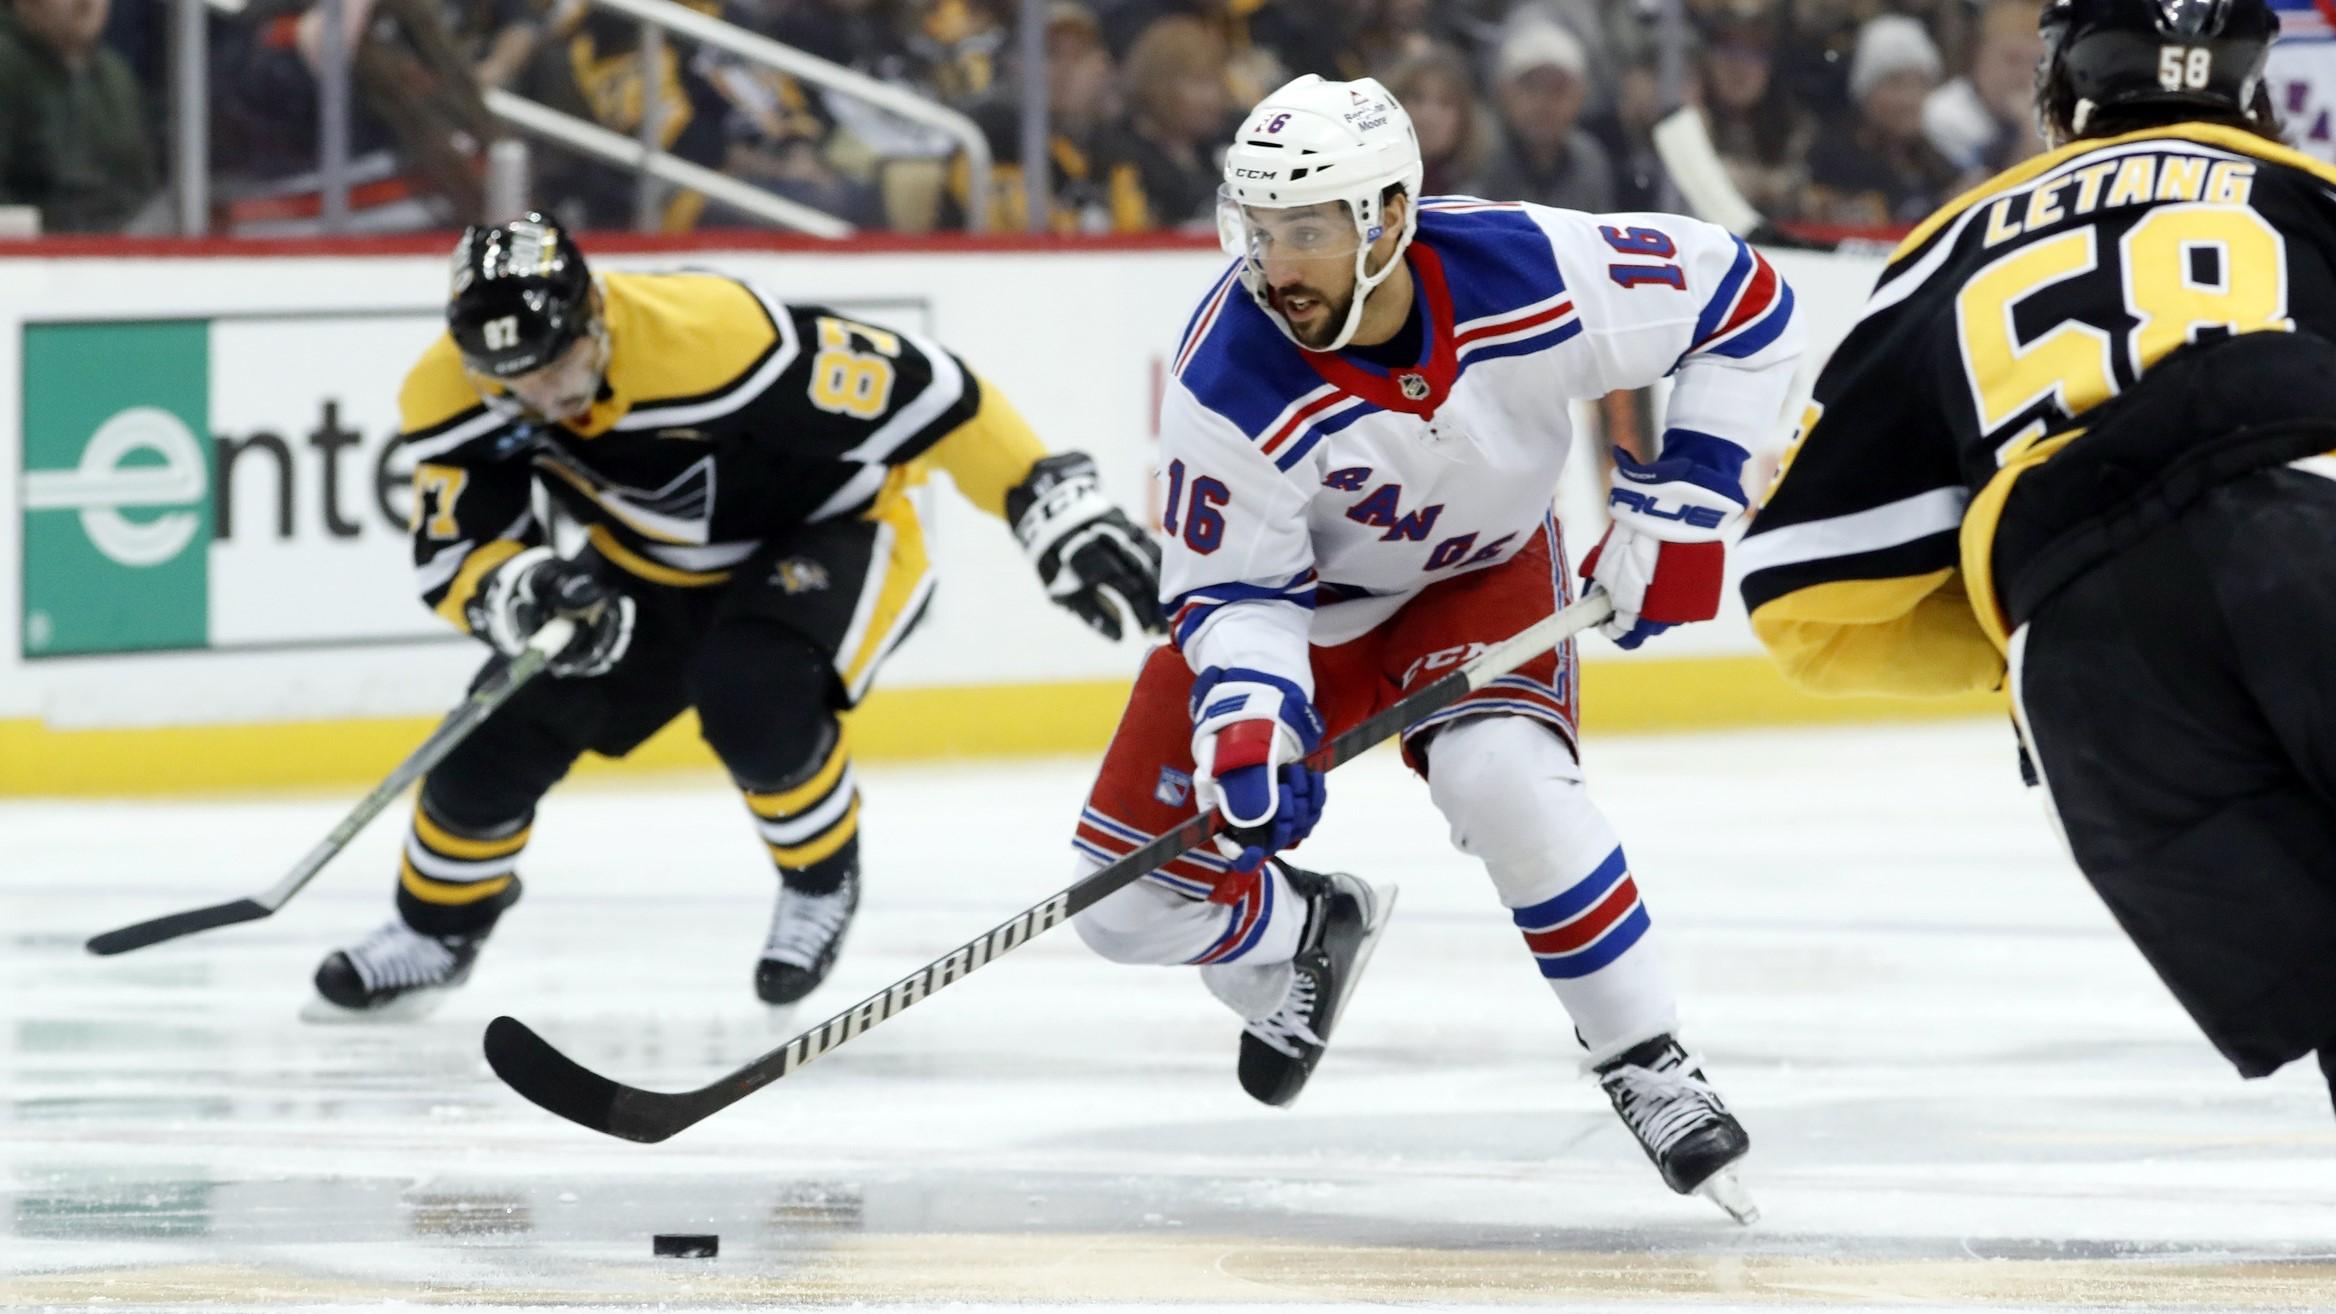 Dec 20, 2022; Pittsburgh, Pennsylvania, USA; New York Rangers center Vincent Trocheck (16) moves the puck against the Pittsburgh Penguins during the first period at PPG Paints Arena. / Charles LeClaire-USA TODAY Sports